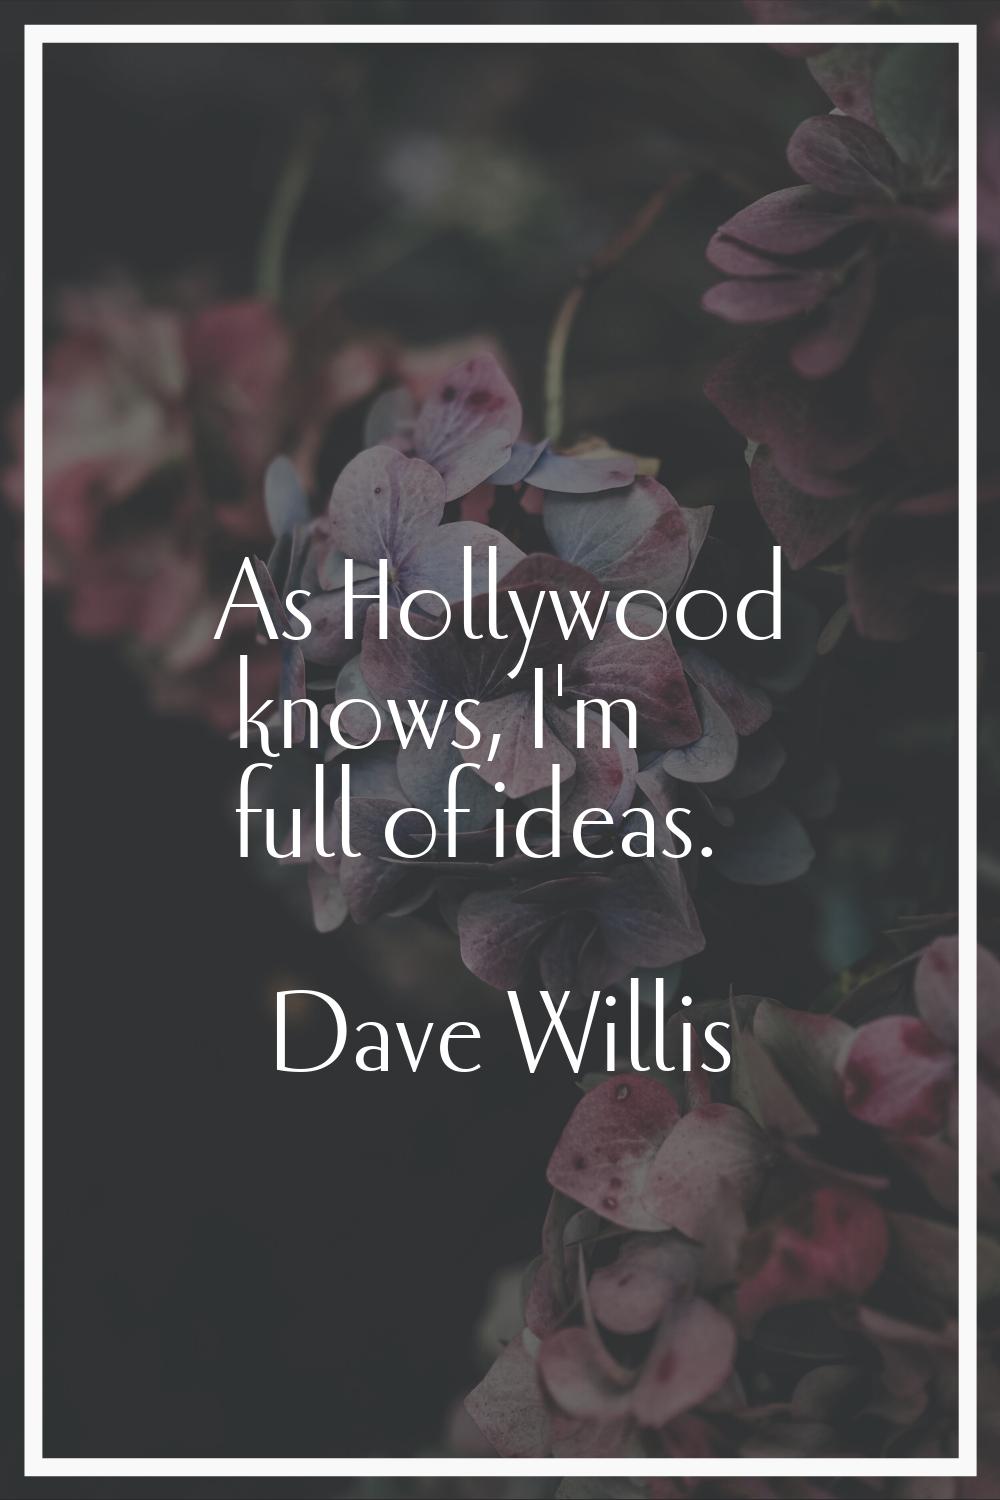 As Hollywood knows, I'm full of ideas.